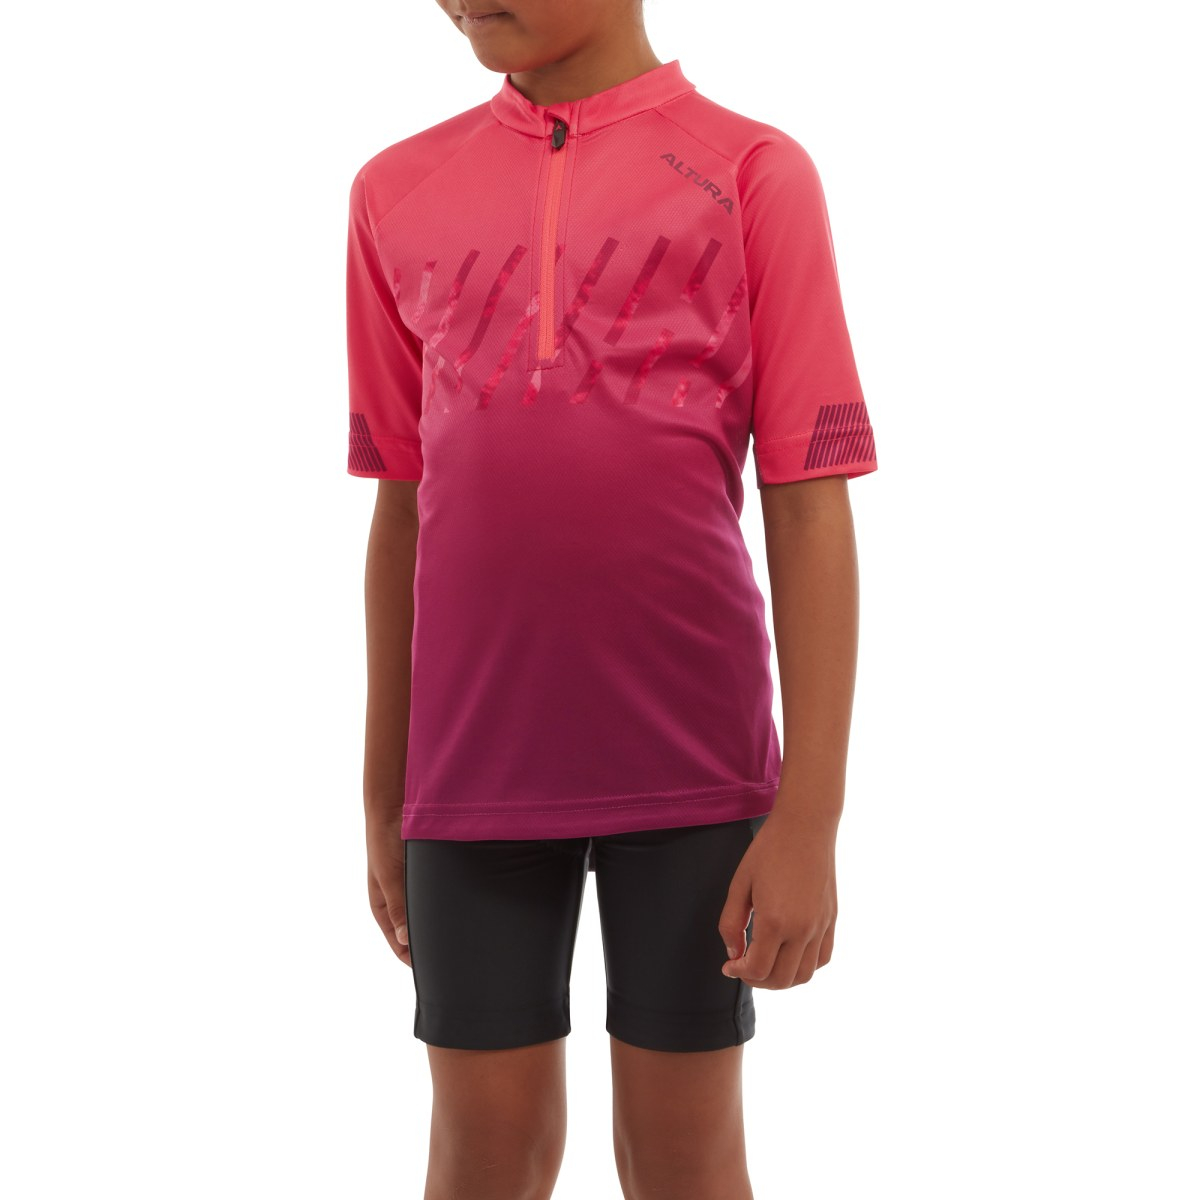 Altura  Kids Airstream Short Sleeve Cycling Jersey 11 to 12 Years PINK